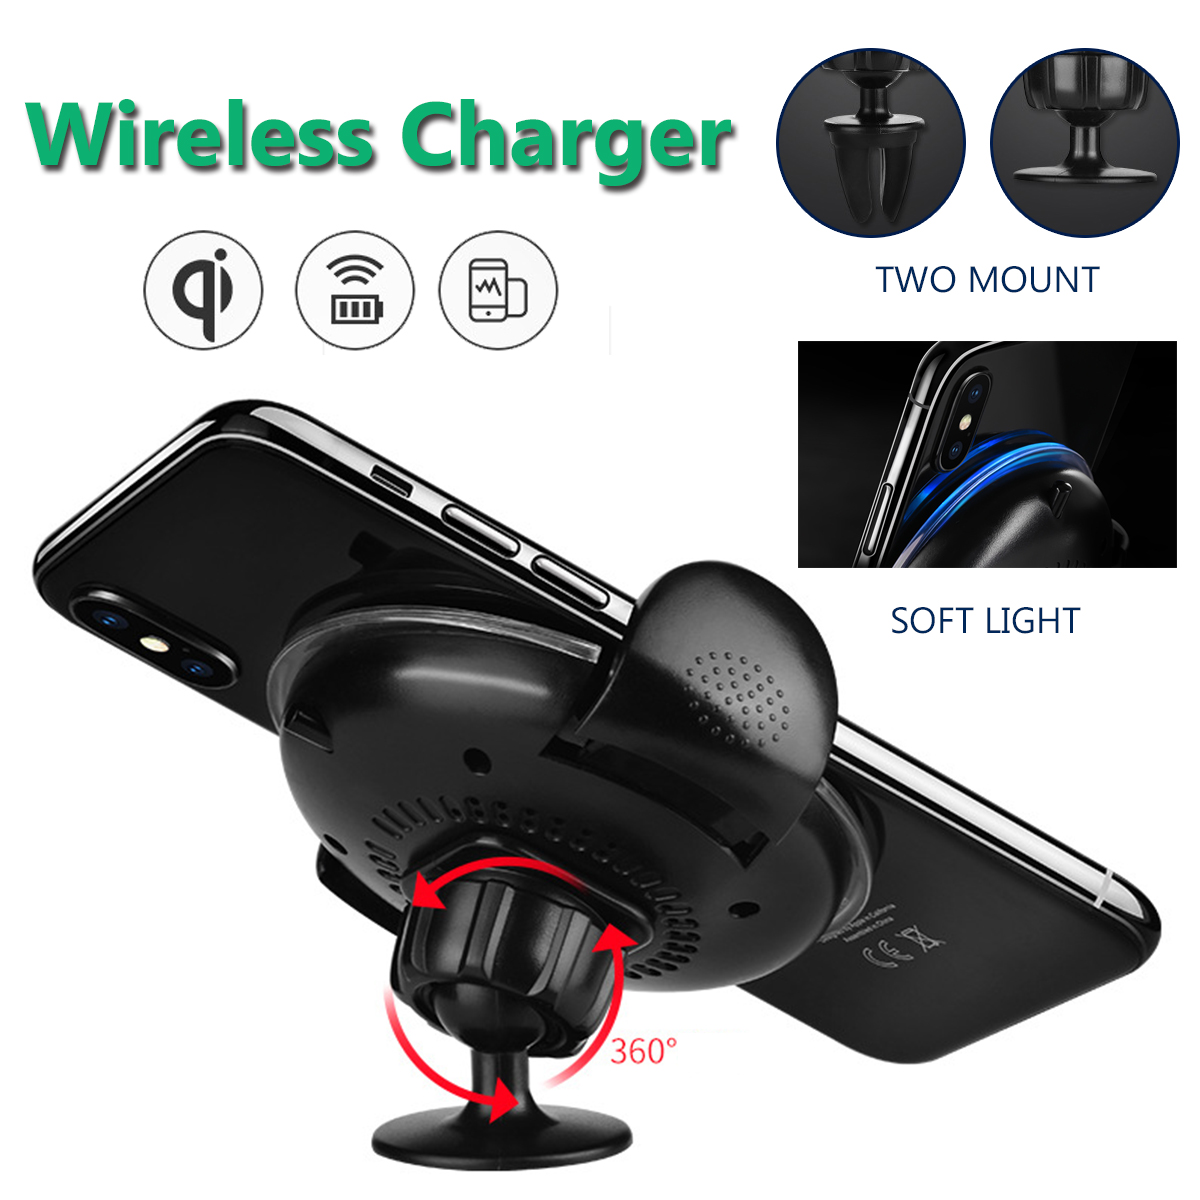 Bakeey-Wireless-Fast-Car-Charger-Two-Mount-Holder-Stand-For-iPhone-8P-iPhone-X-Samsung-S8-1252095-1